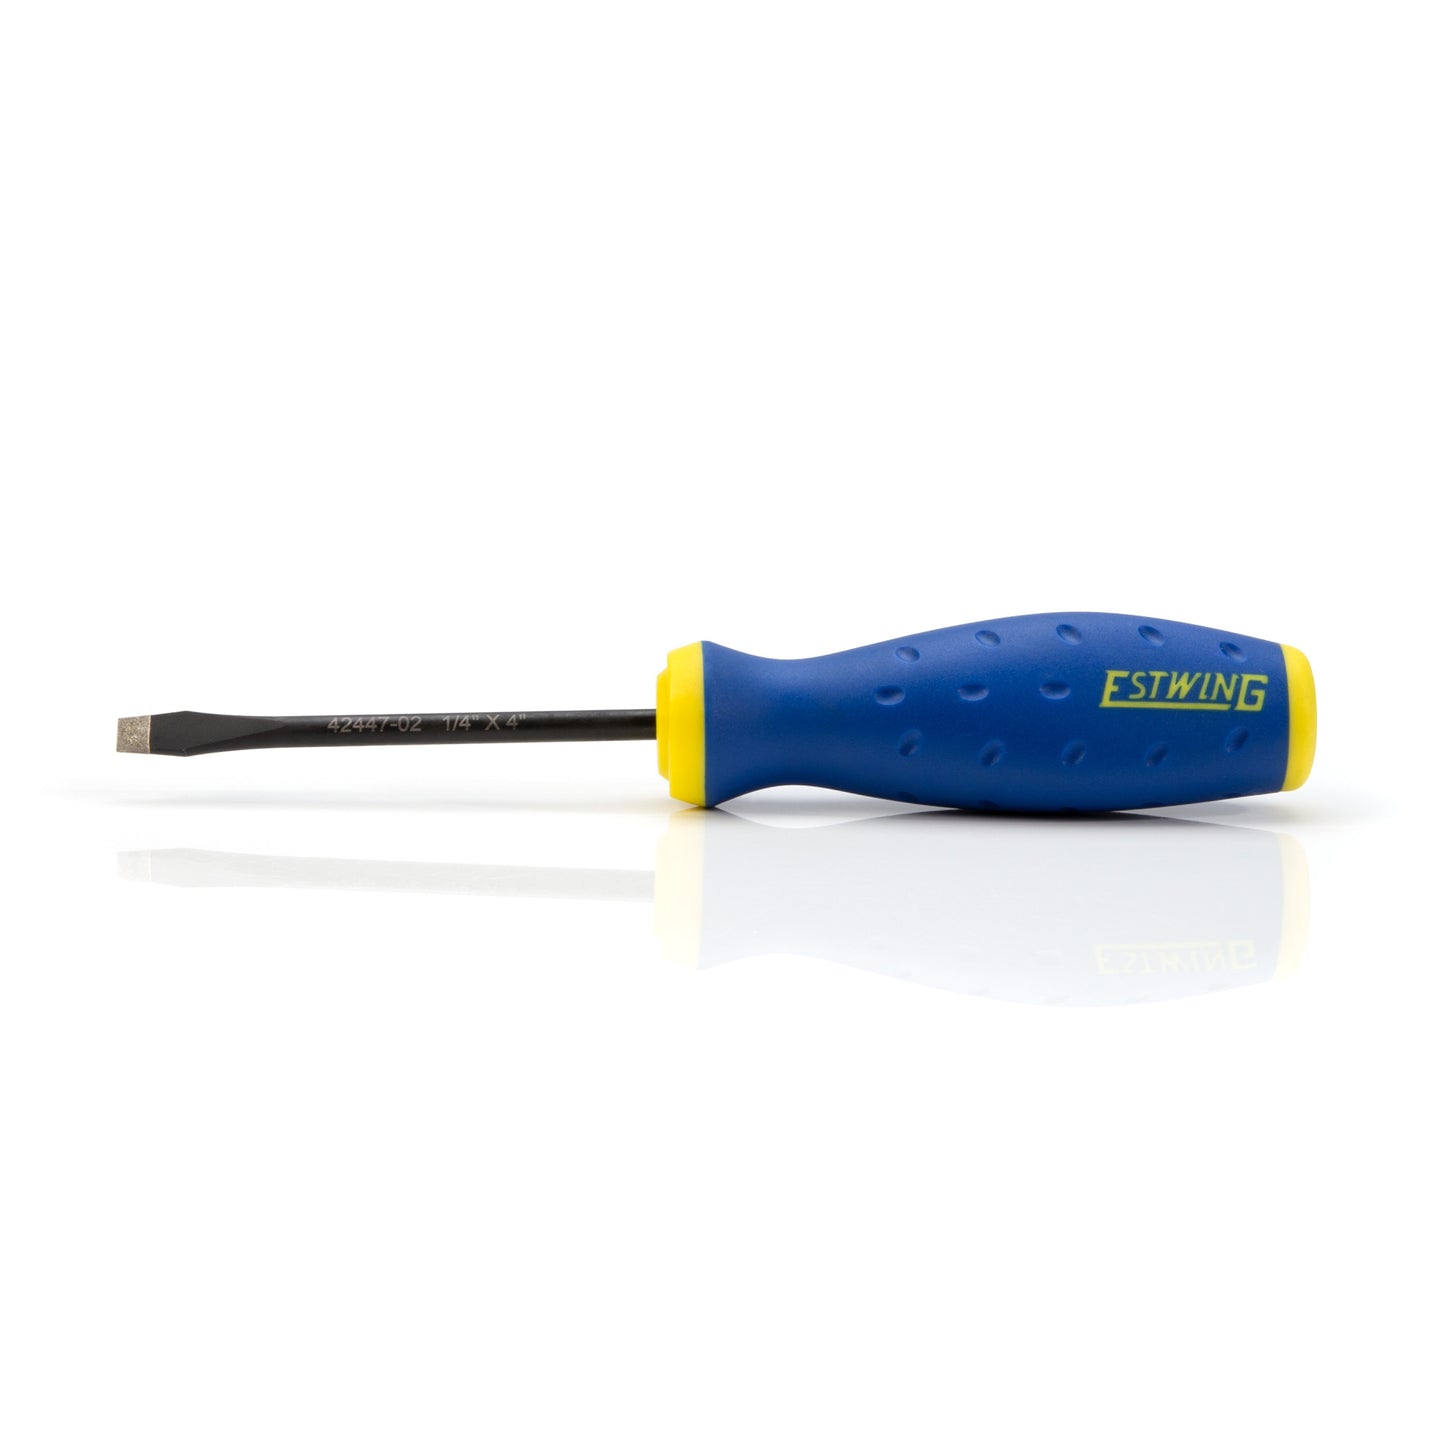 1/4-Inch x 6-Inch Slotted Magnetic Diamond Tip Screwdriver with Ergonomic Handle